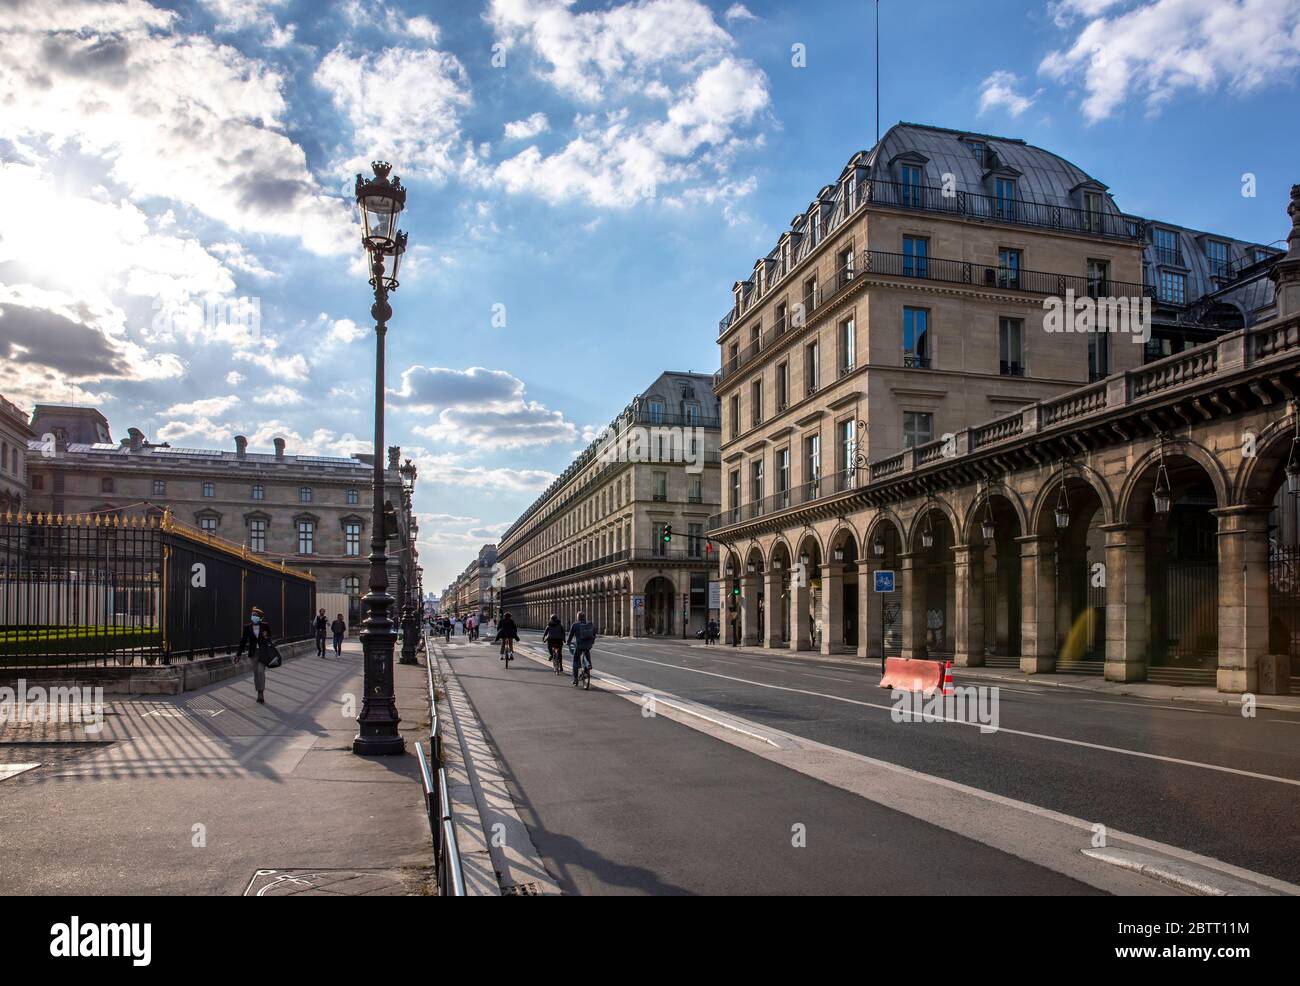 Paris, France - May 14, 2020: Typical luxury street in Paris 'rue de Rivoli' during lockdown due to covid-19 Stock Photo